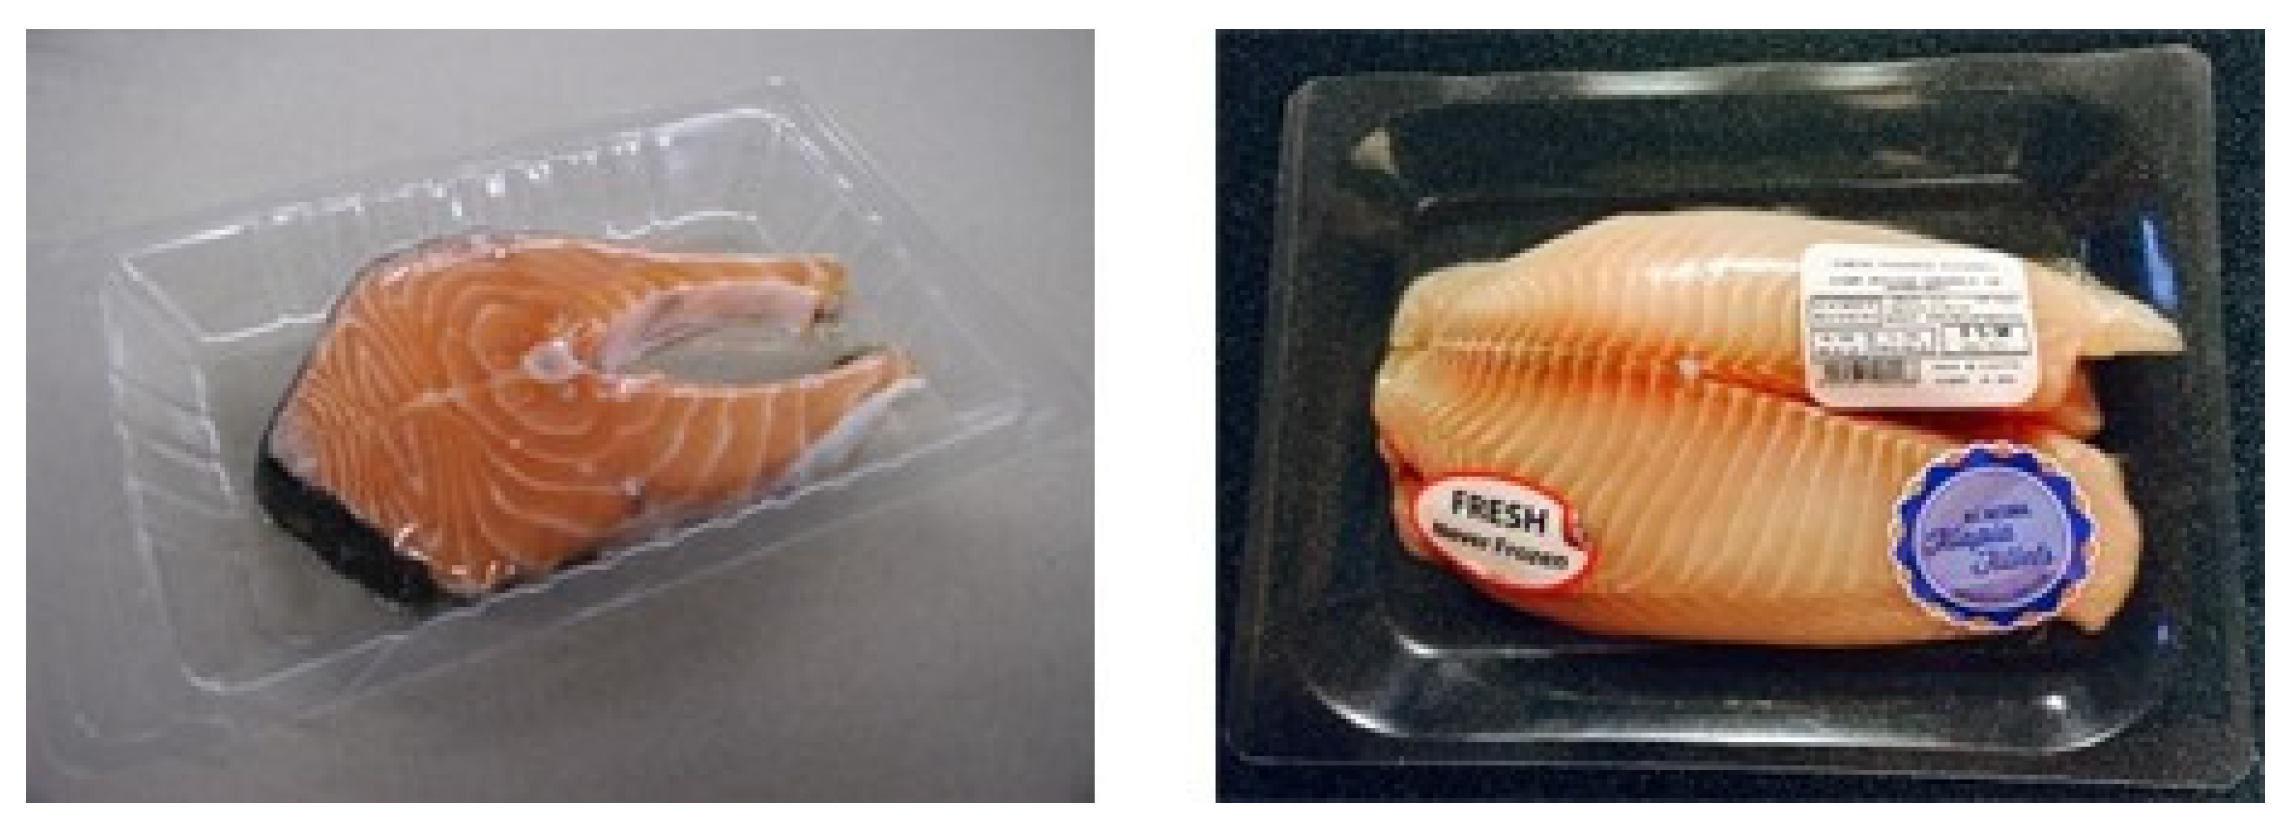 Storing Fish, Meat and Poultry Safely on a Commercial Scale